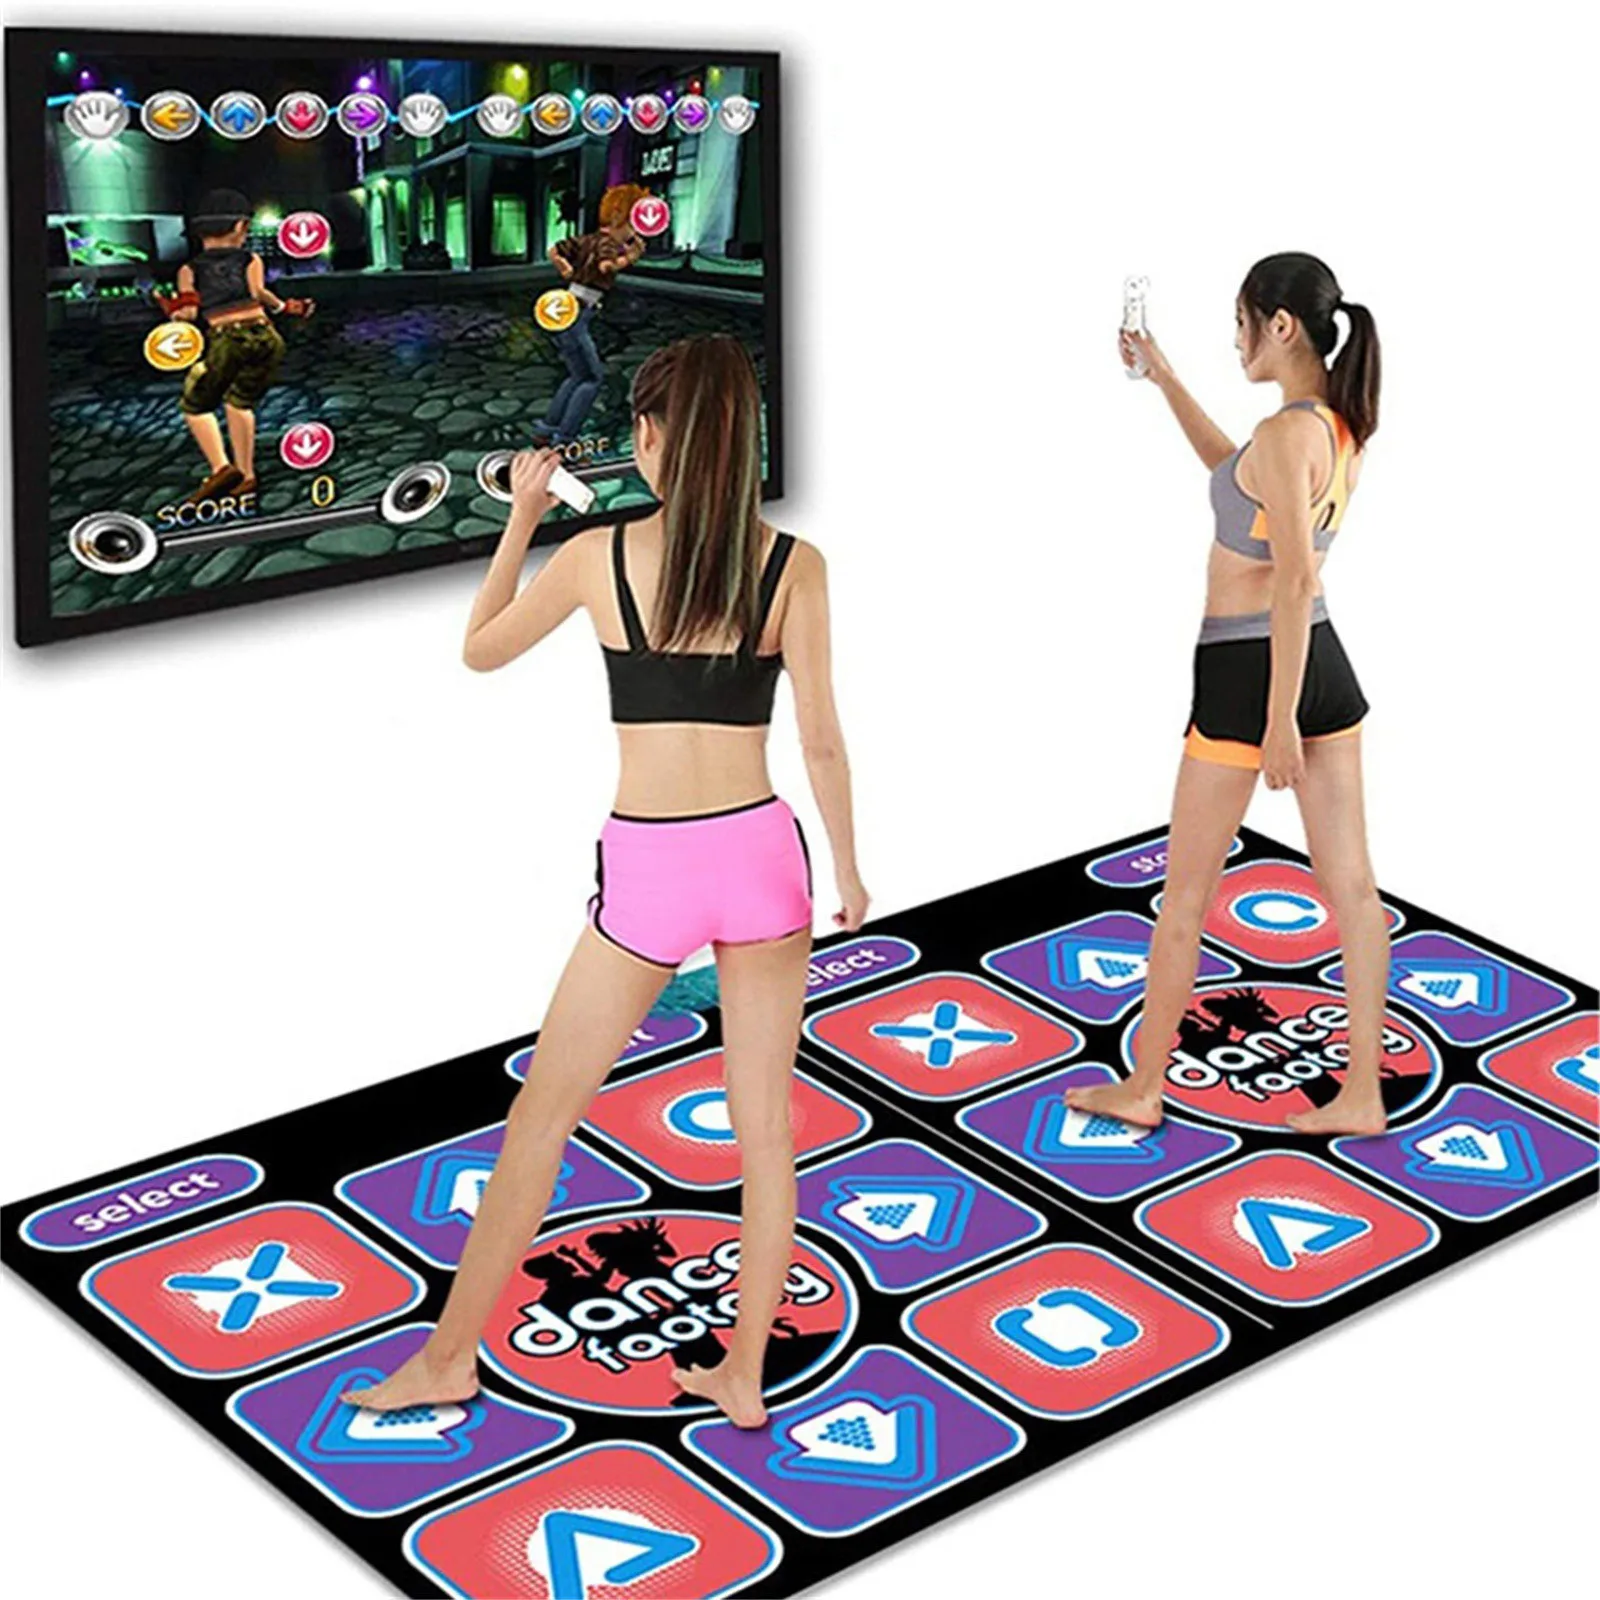 Plug and Play Sense Game Yoga Game Blanket,Multi-Function Games & Levels Yunkin Double User Dance Mats for Kids Adults,Non-Slip Dancers Step Pads with Music 